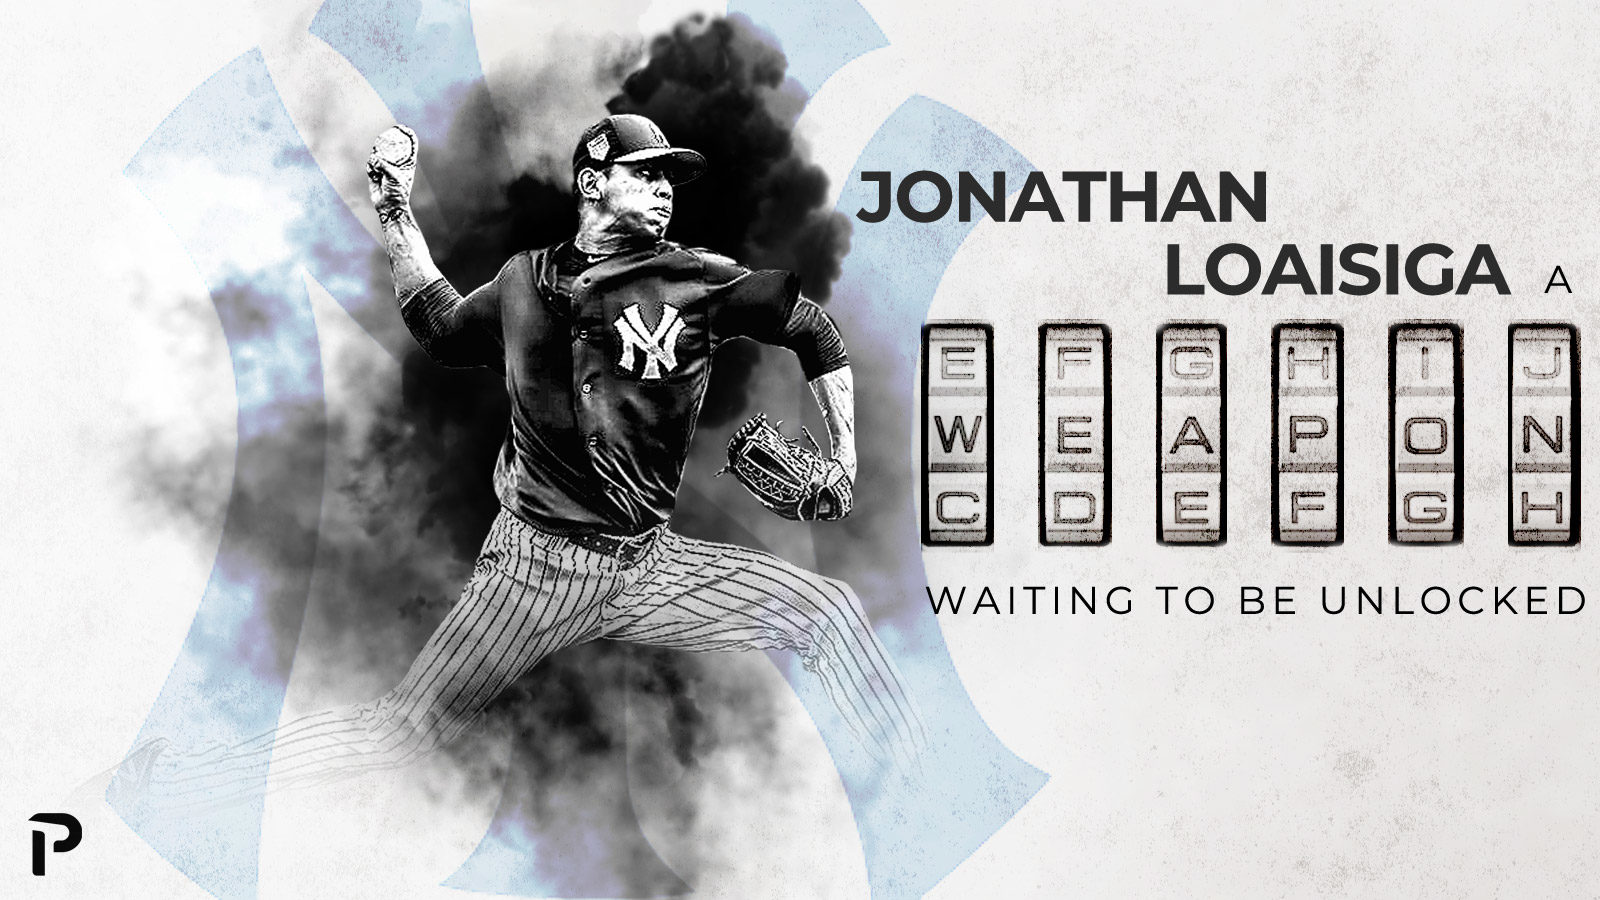 Jonathan Loáisiga is a Weapon Waiting to Be Unlocked